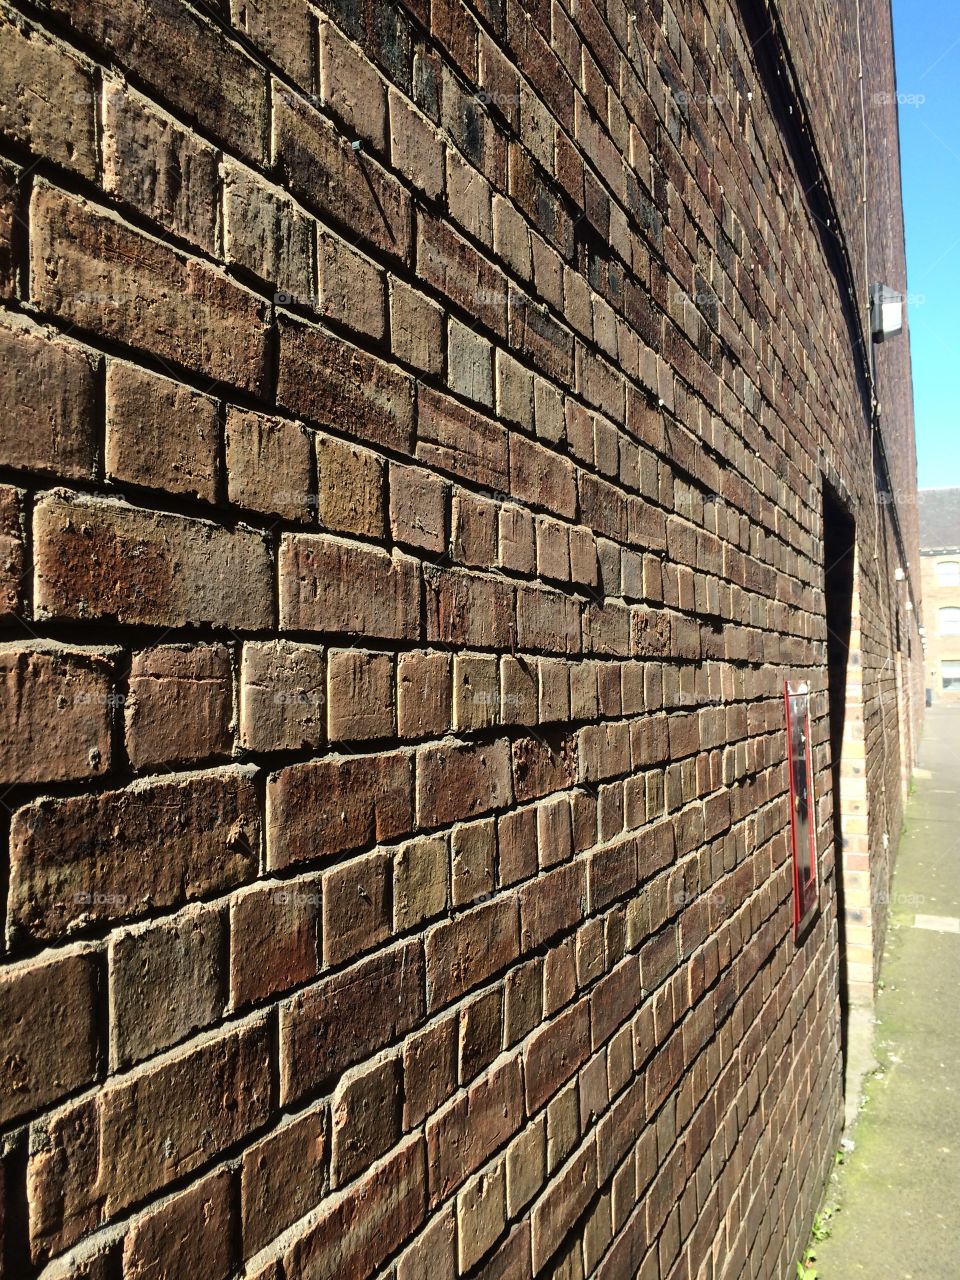 The Wall. Walking home, sun caught this brick wall in a really nice way. I didn't use any effects!